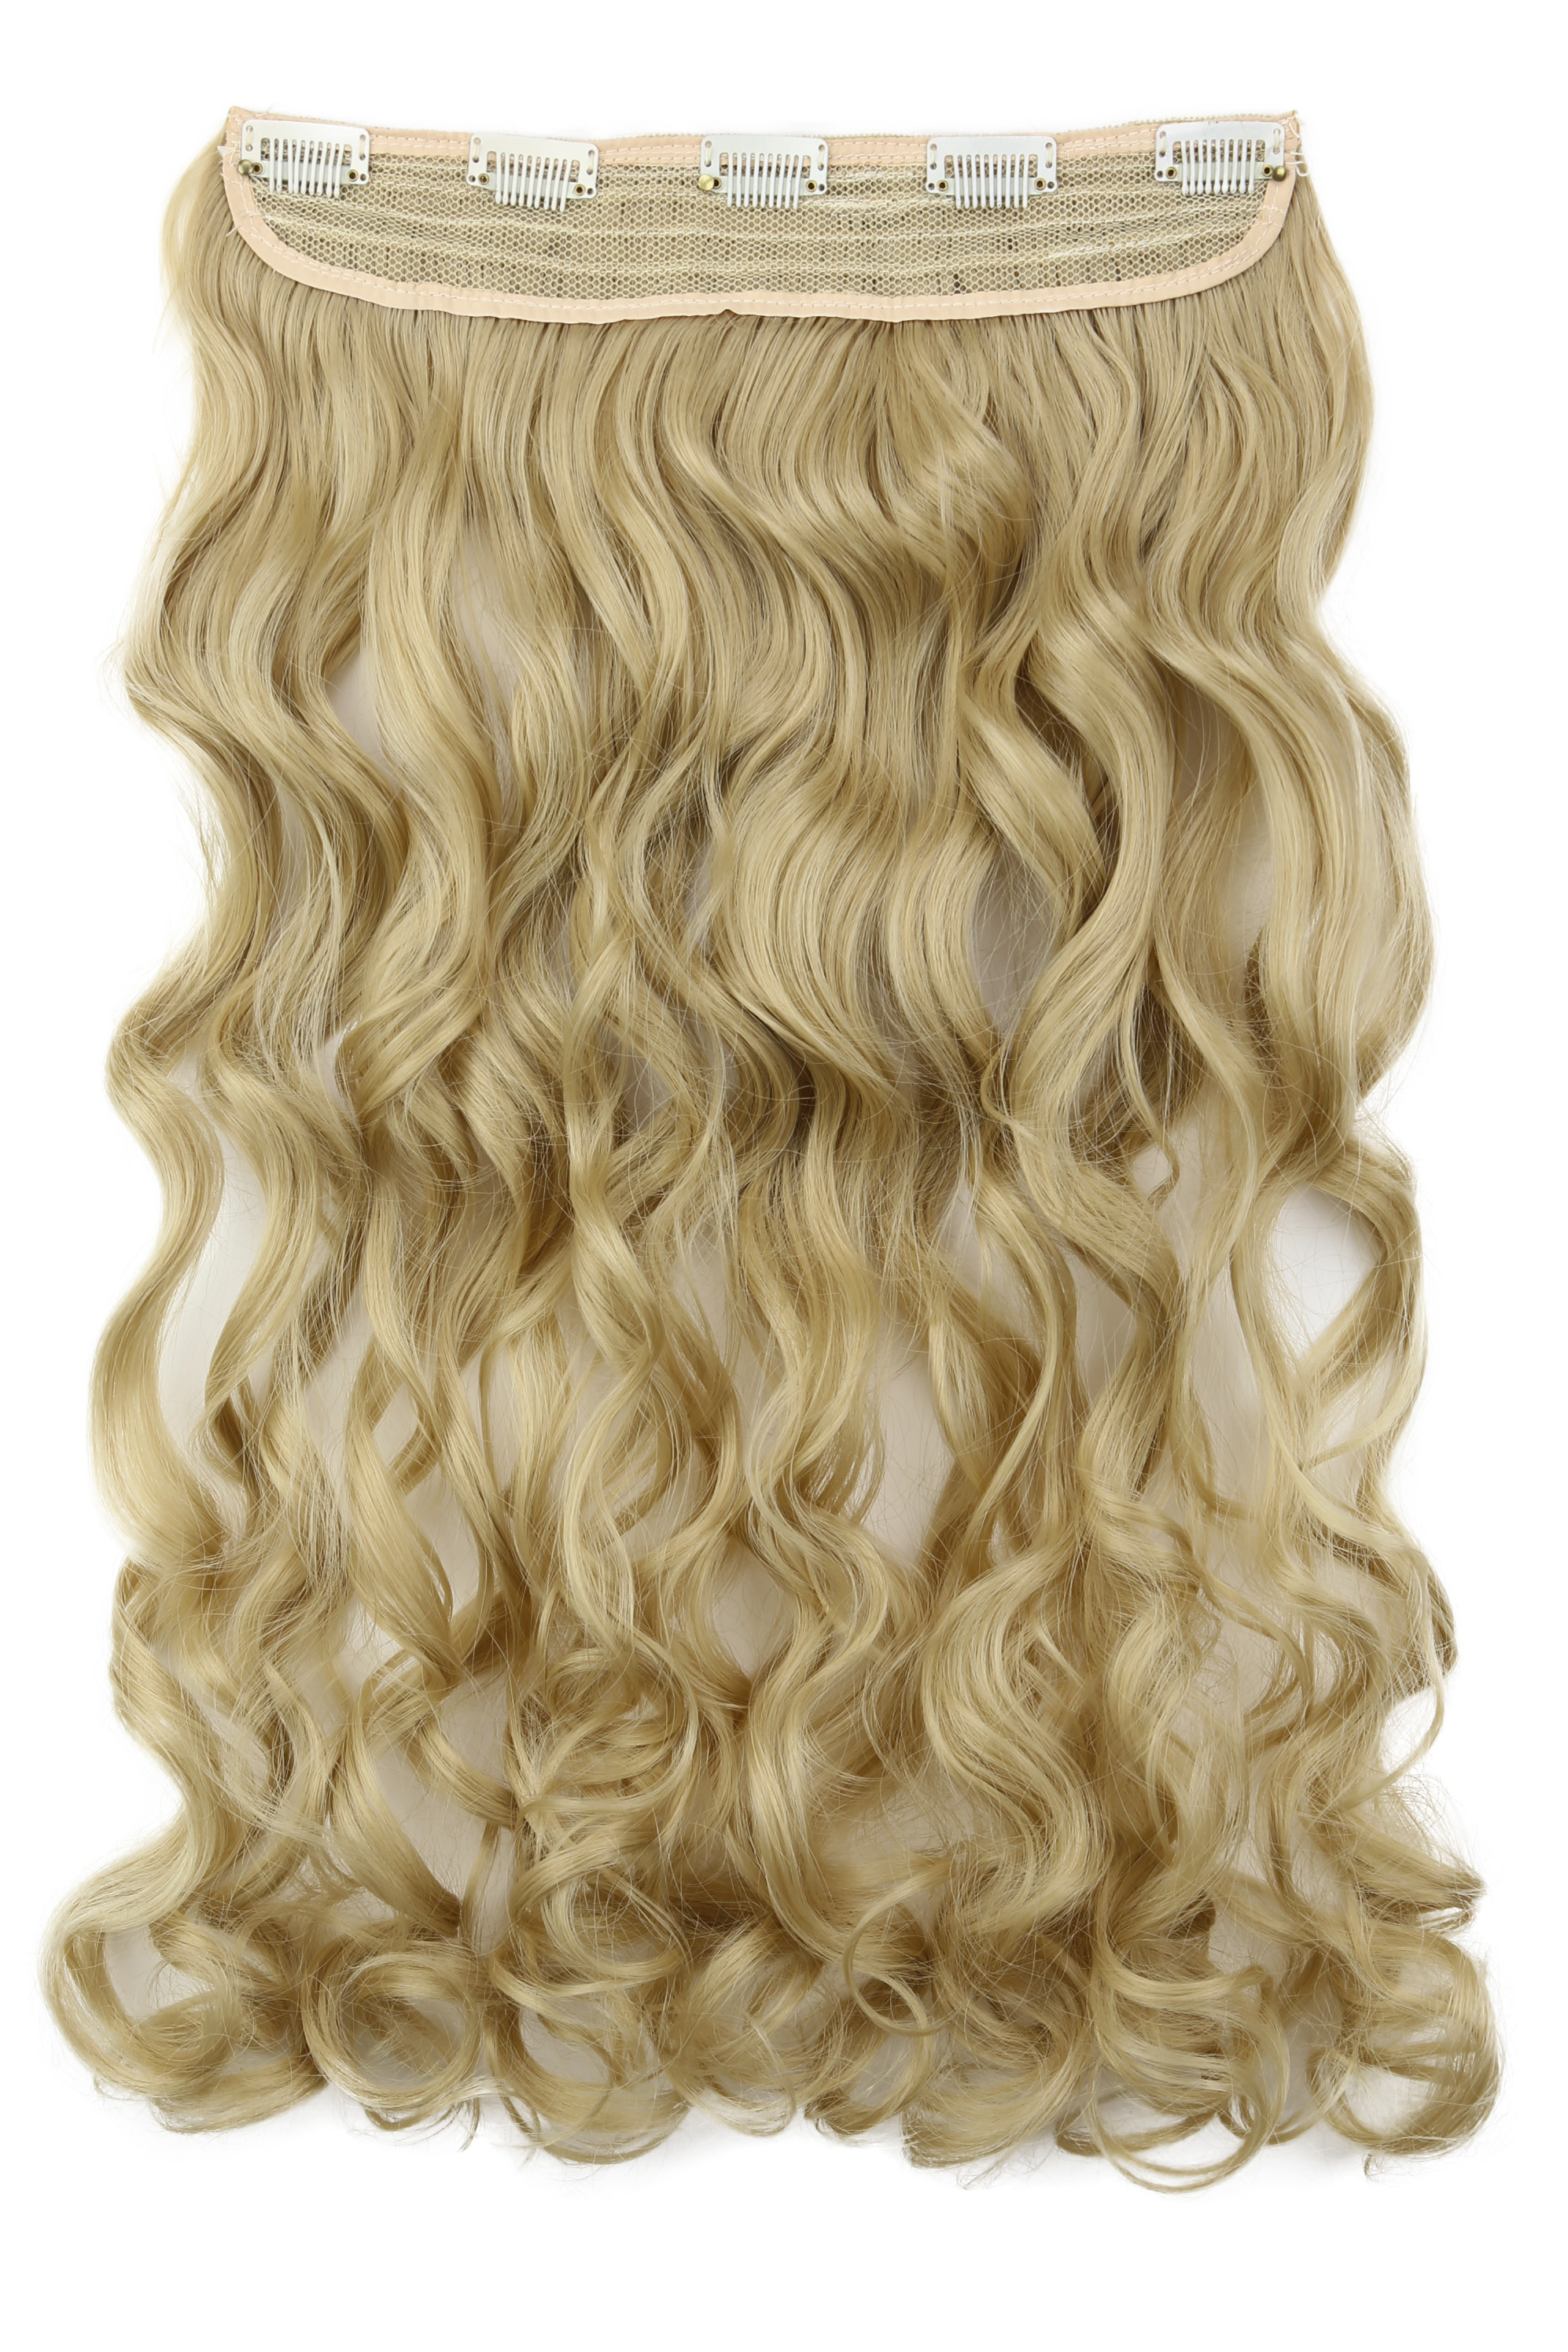 Extensions Hilary 1-teilig C71-1